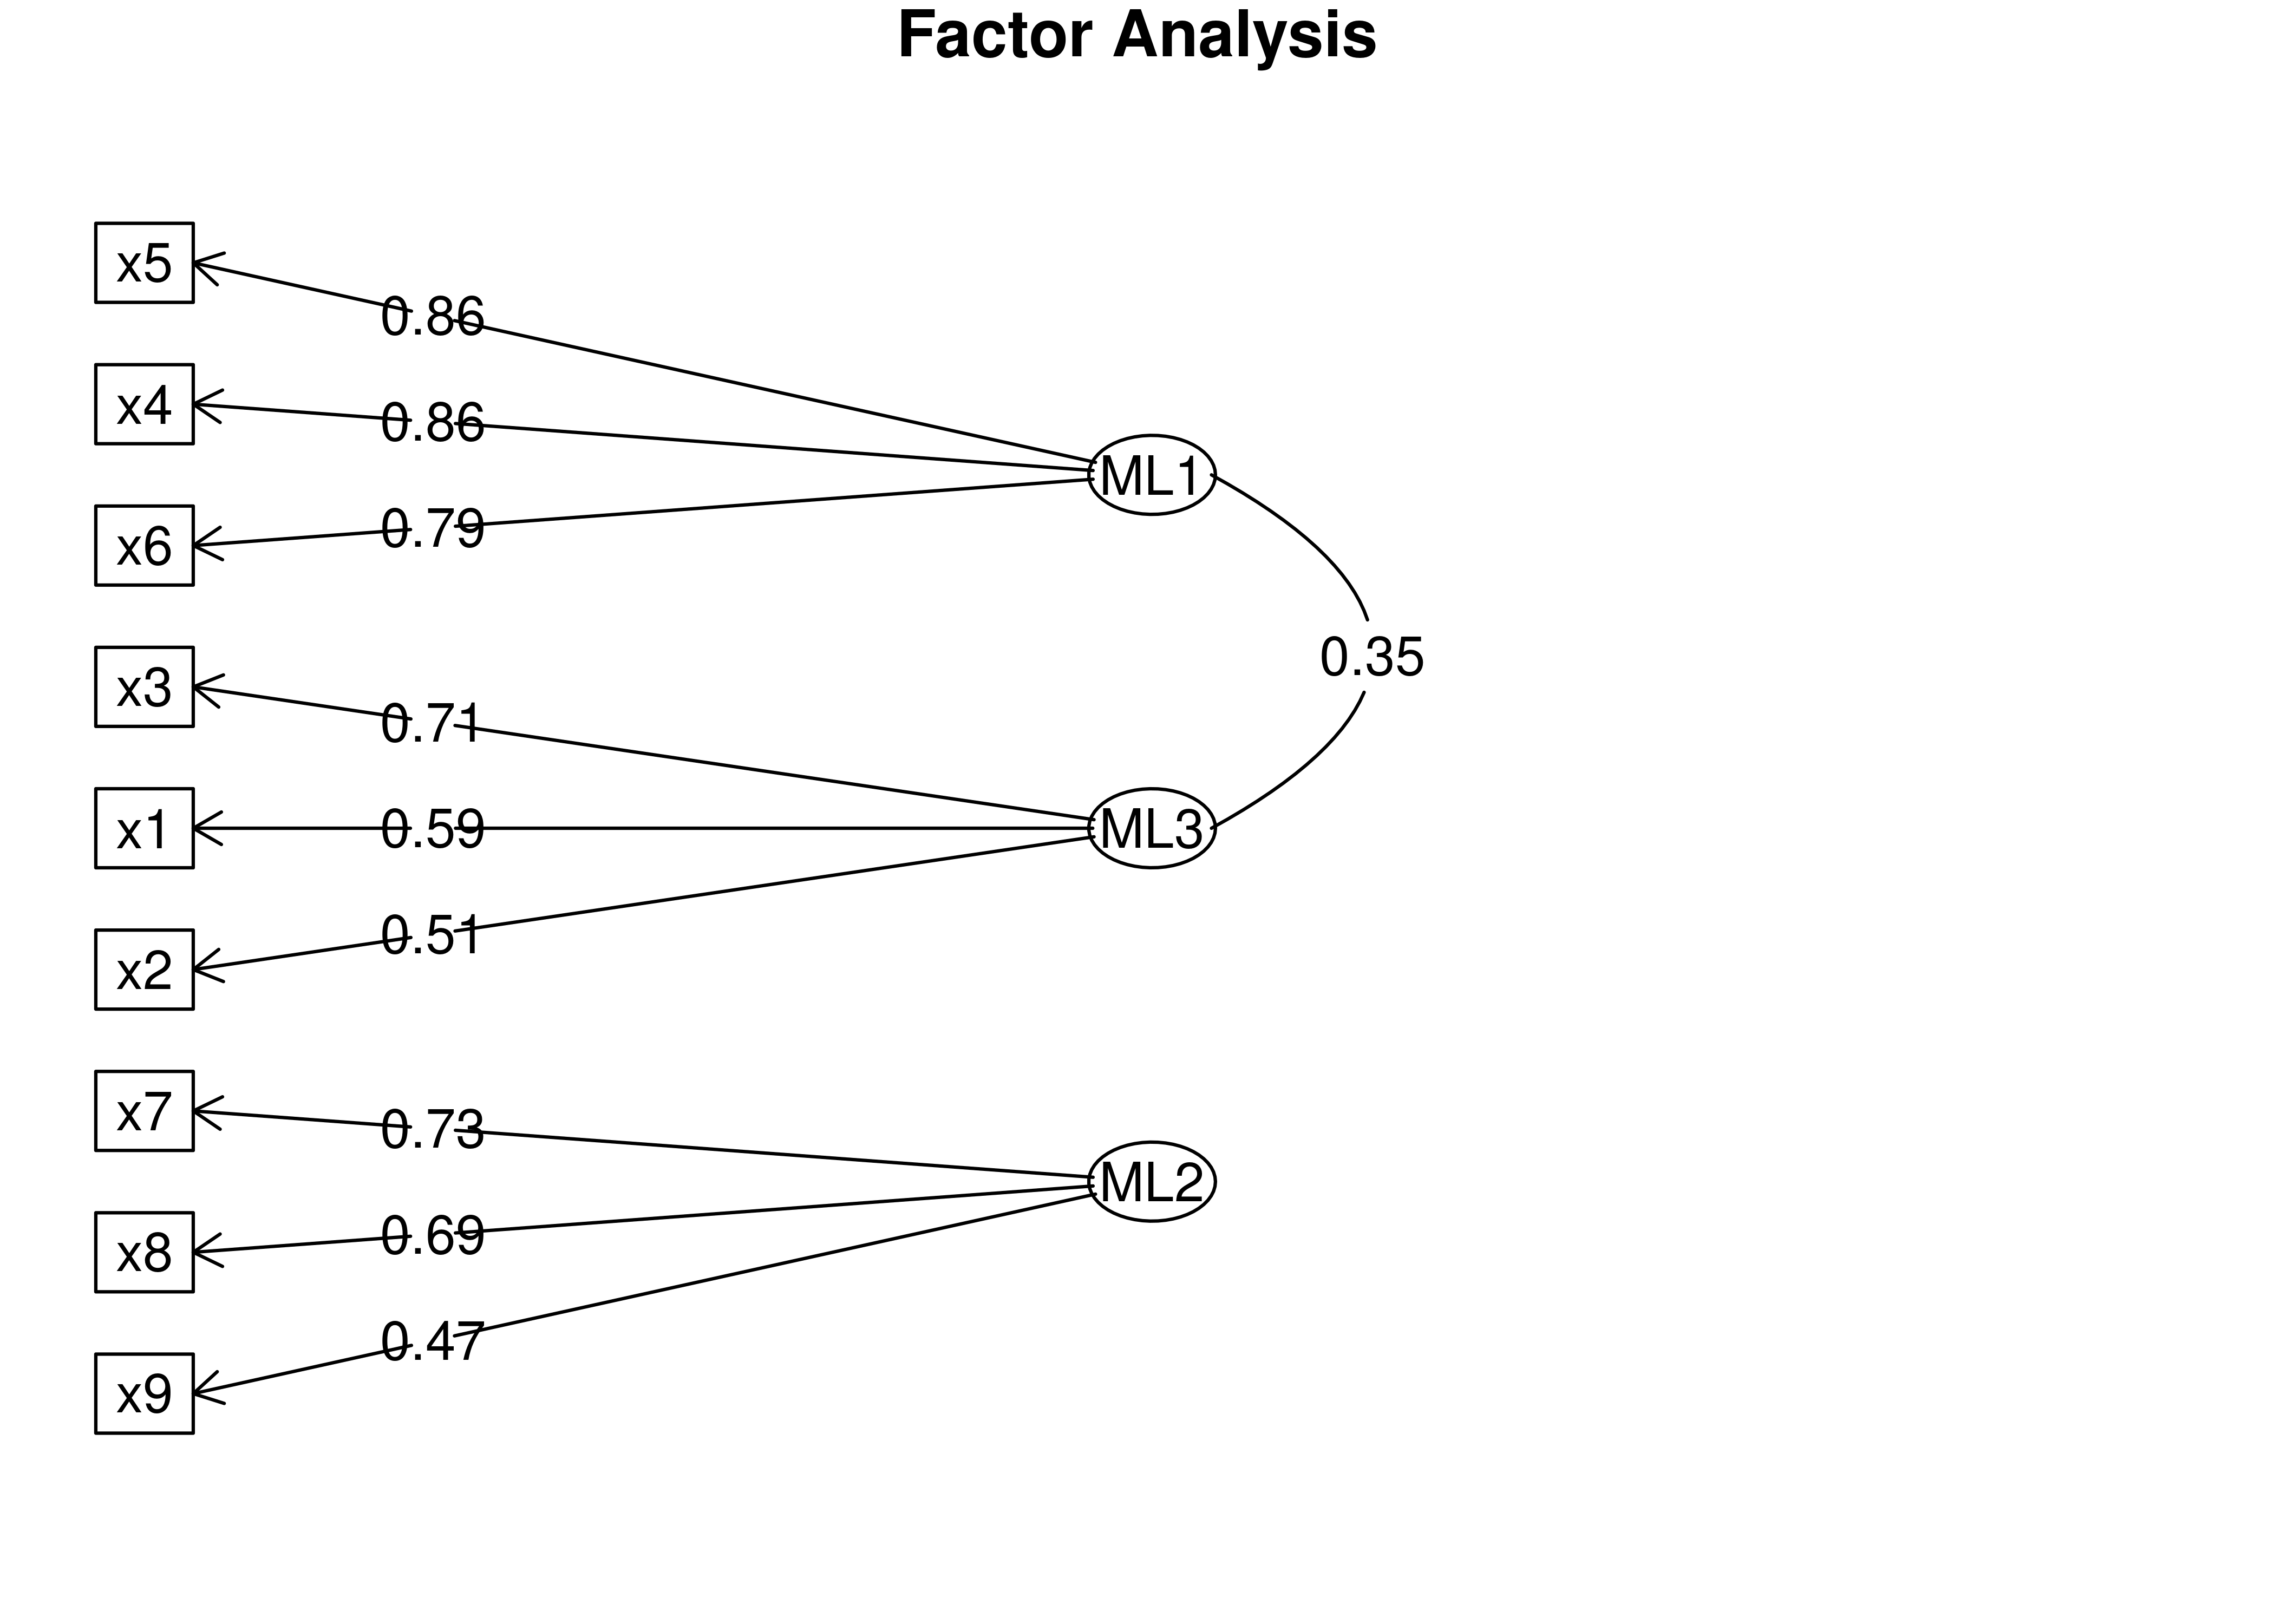 Factor Diagram With Oblique Rotation in Exploratory Factor Analysis.